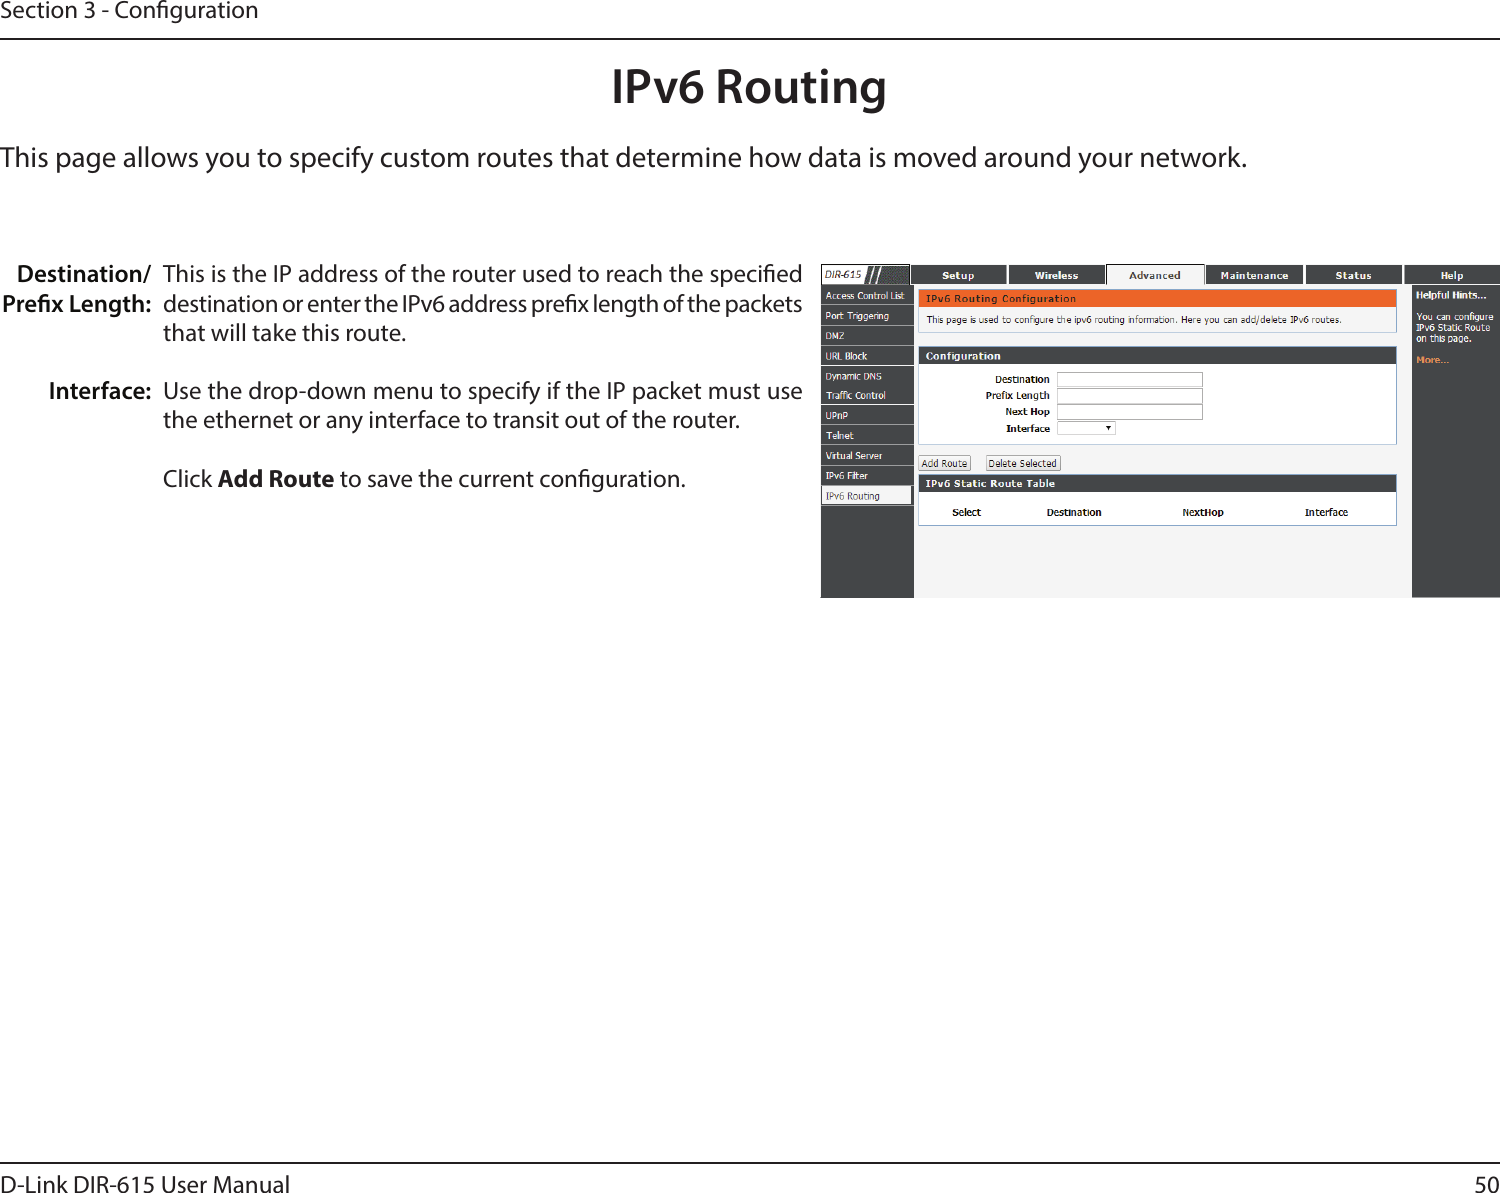 50D-Link DIR-615 User ManualSection 3 - CongurationIPv6 RoutingThis is the IP address of the router used to reach the specied destination or enter the IPv6 address prex length of the packets that will take this route. Use the drop-down menu to specify if the IP packet must use the ethernet or any interface to transit out of the router.Click Add Route to save the current conguration.Destination/Prex Length:Interface:This page allows you to specify custom routes that determine how data is moved around your network. 